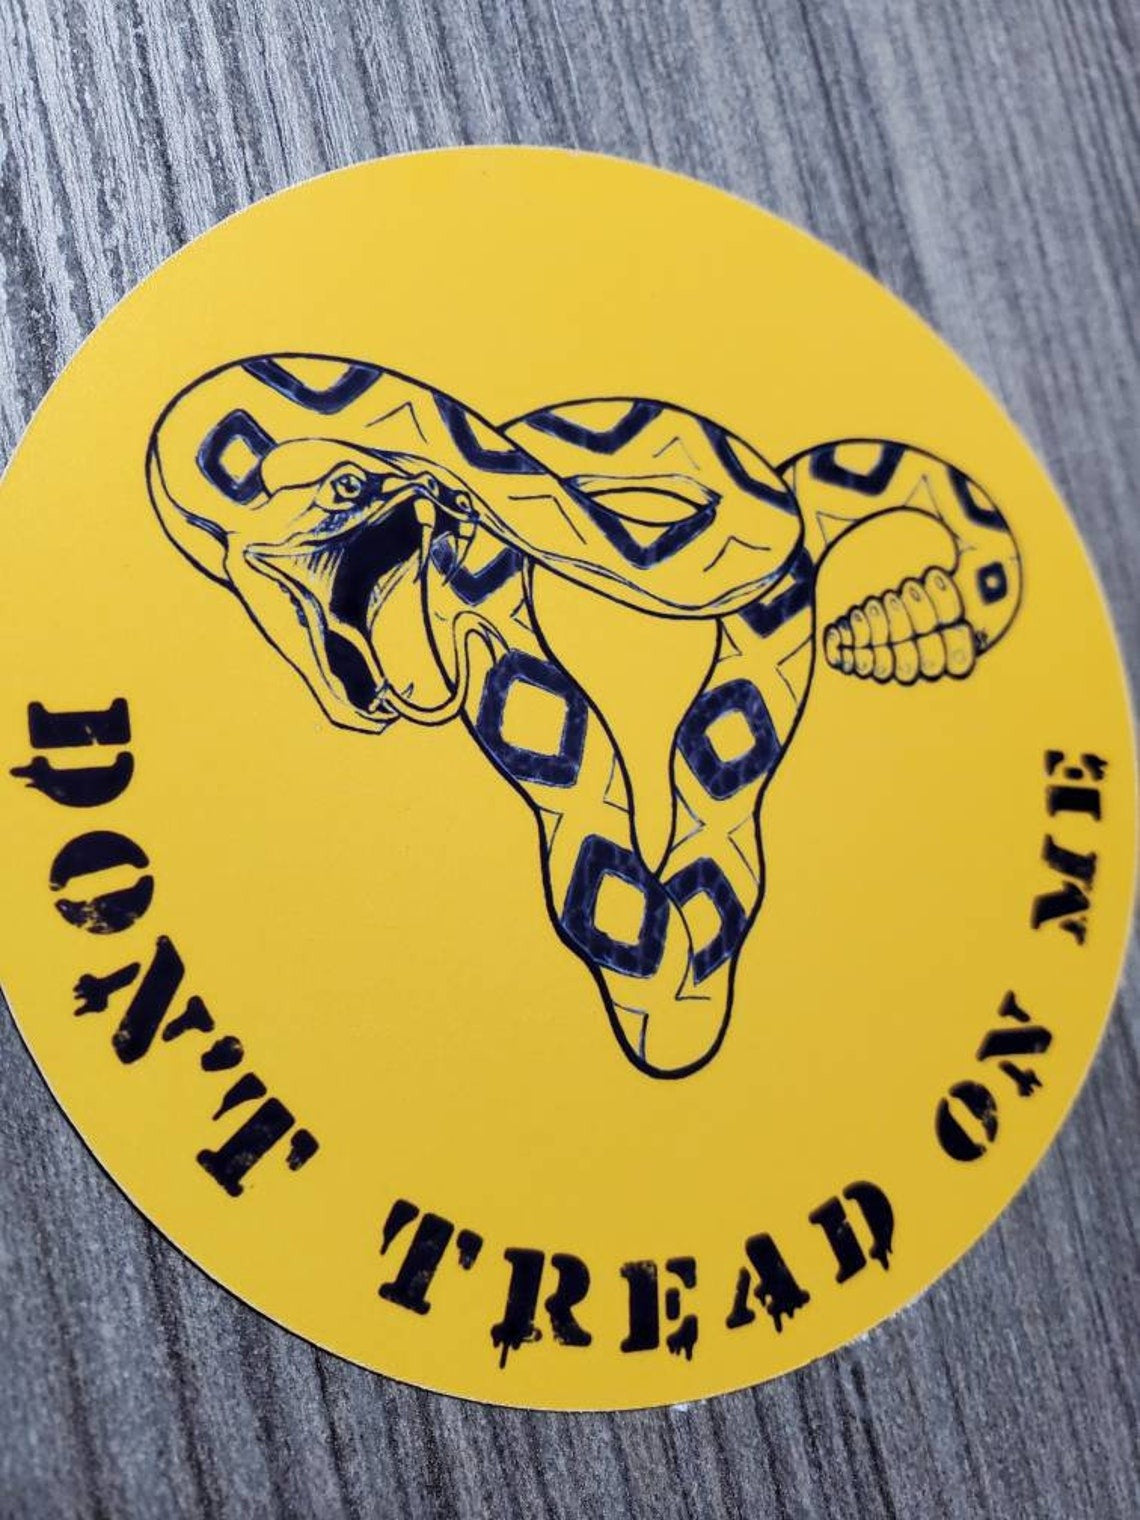 Don't Tread on Me - Women's Rights Feminism Stickers - Multiple Sizes IDL Vinyl Decal Sticker Variable Size